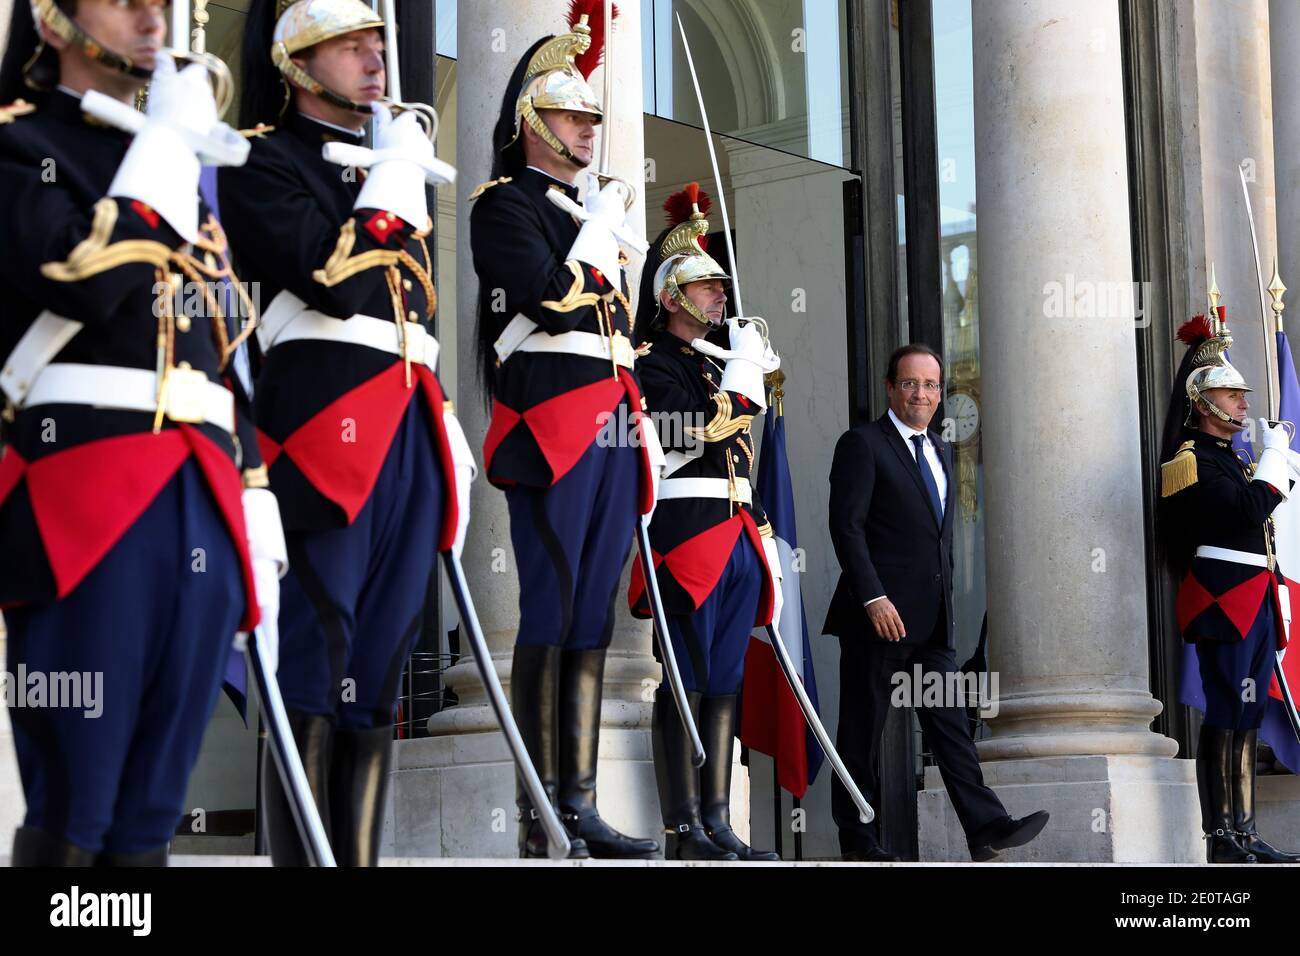 President Francois Hollande awaits his Yemeni counterpart Abd Rabbo Mansour Hadi prior to a meeting at the Elysee Presidential Palace, in Paris, France, on October 4, 2012. Photo by Stephane Lemouton/ABACAPRESS.COM. Stock Photo